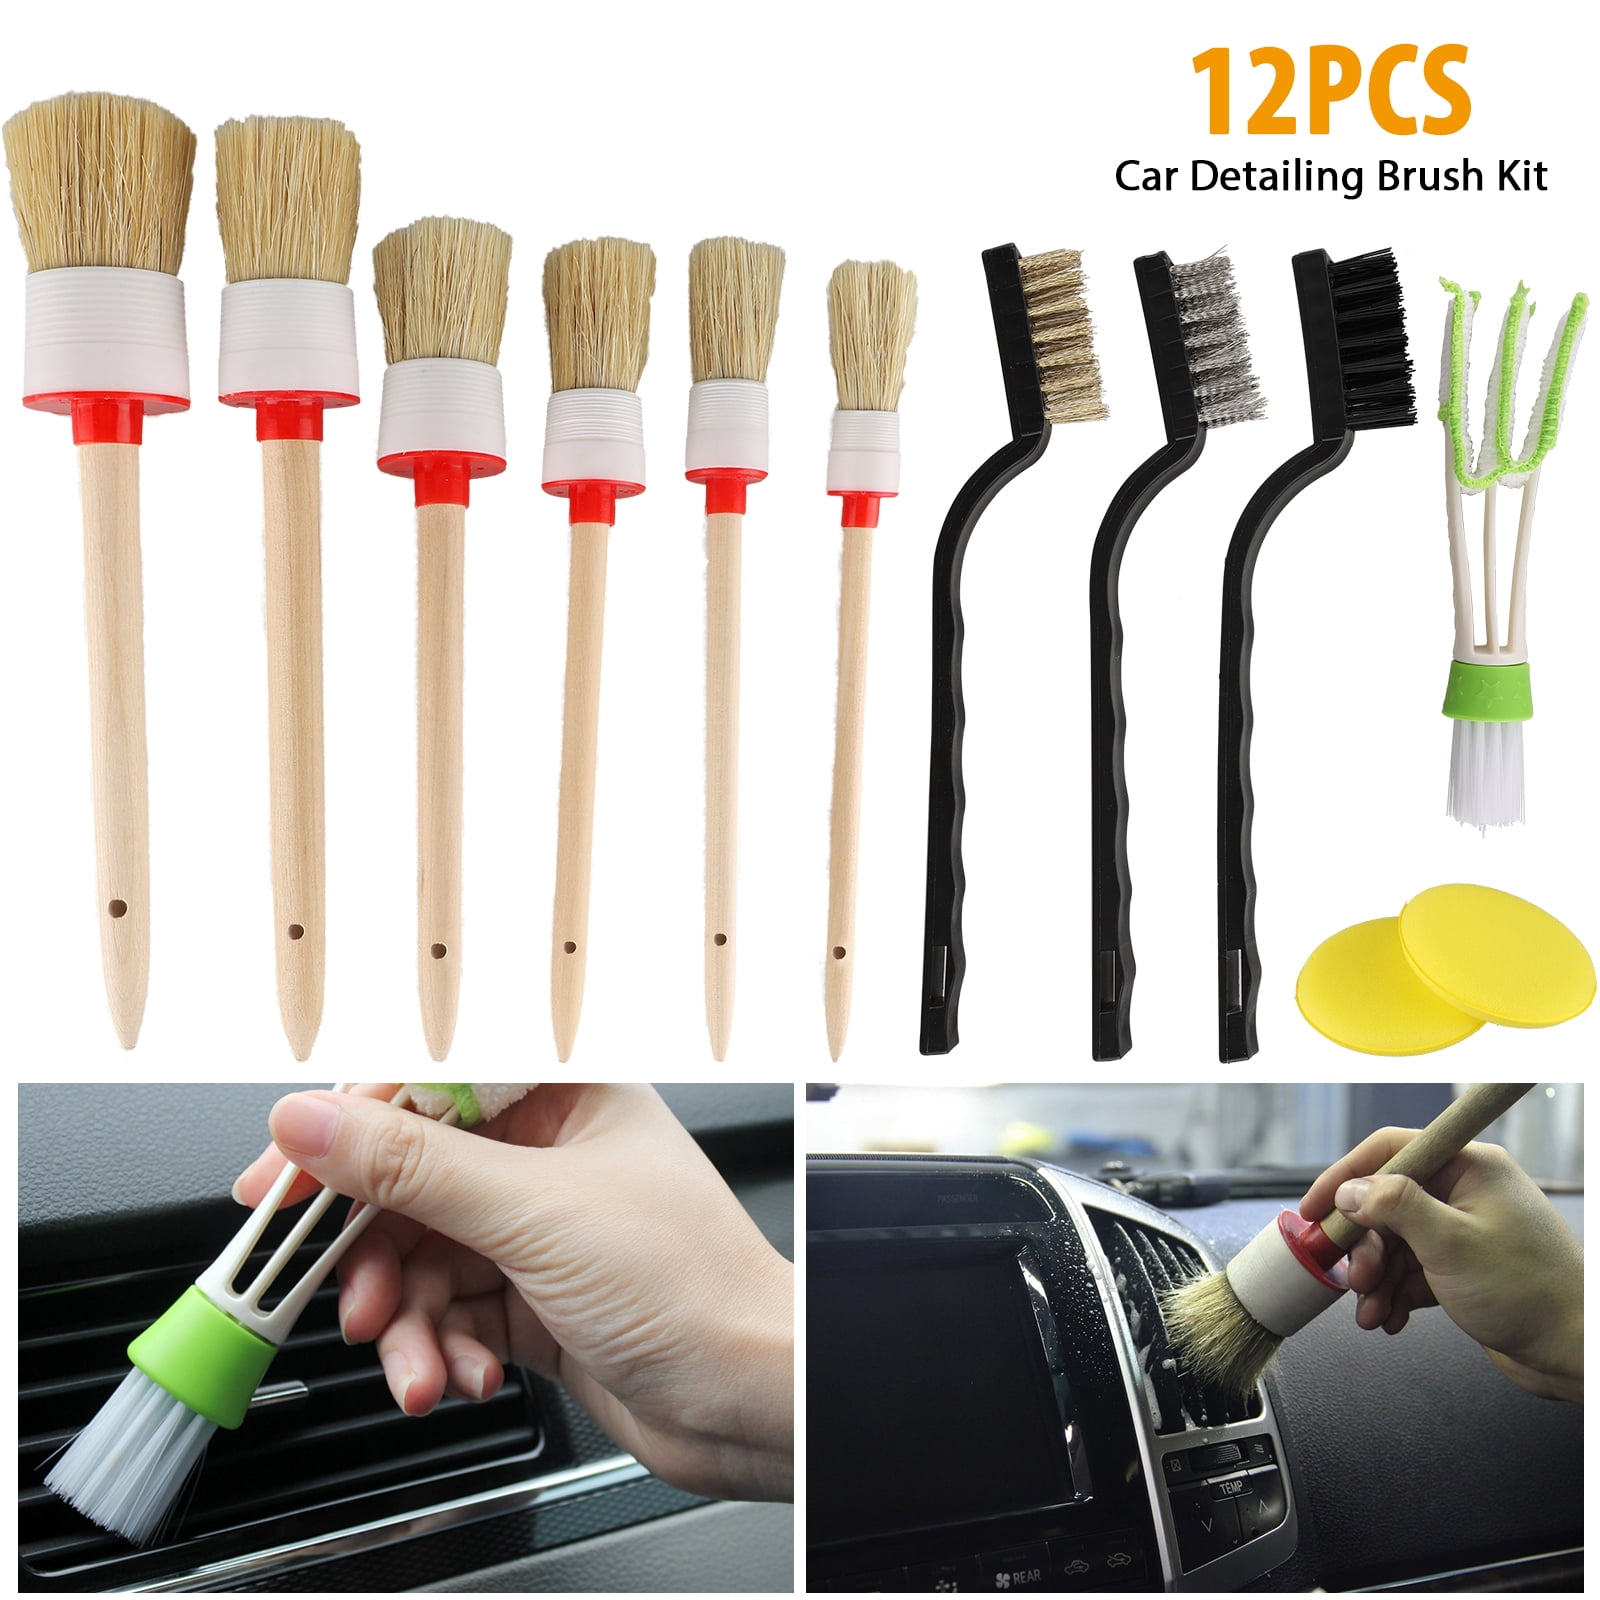 EEEkit 12 Pieces Auto Detailing Brush Set for Cleaning Wheels, Interior